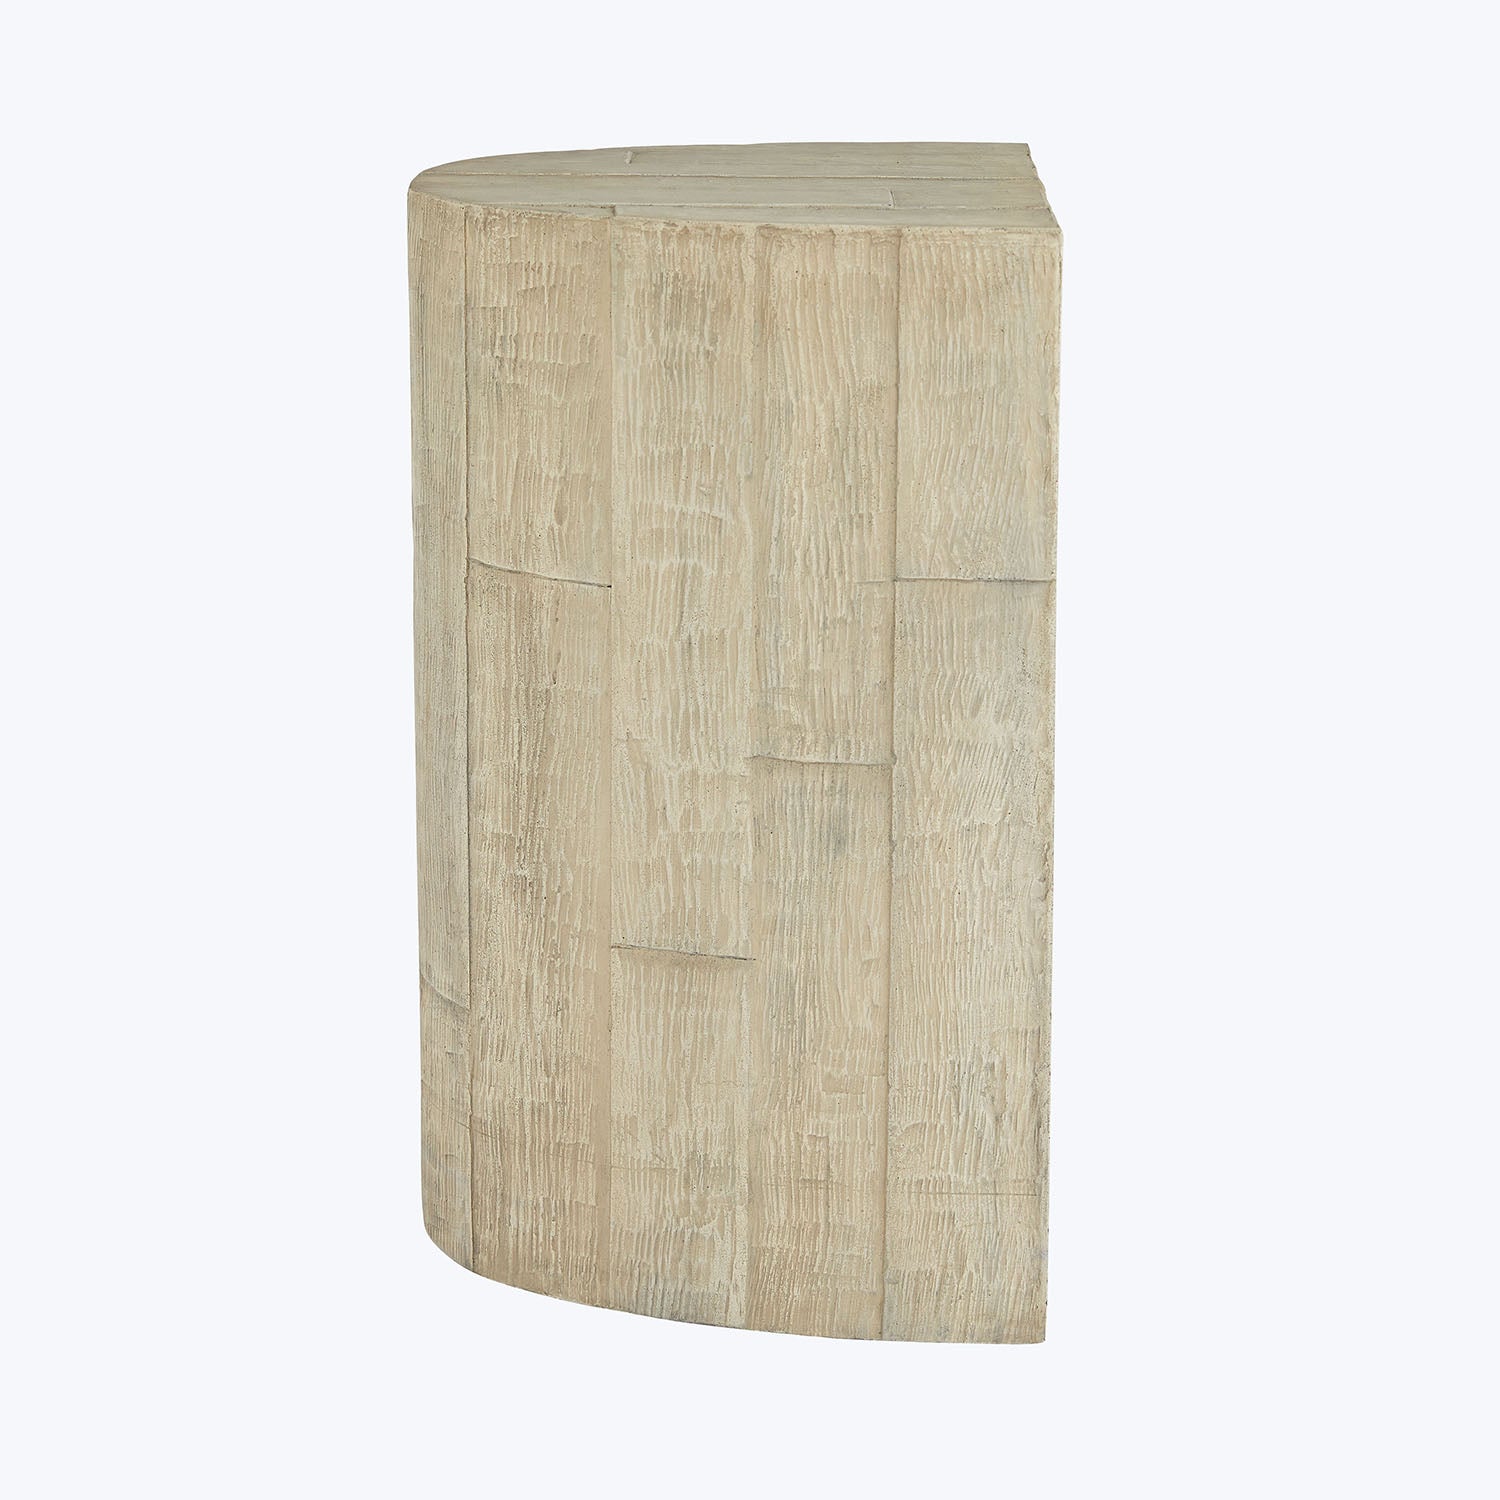 Aged wooden block with curved edge adds rustic charm.